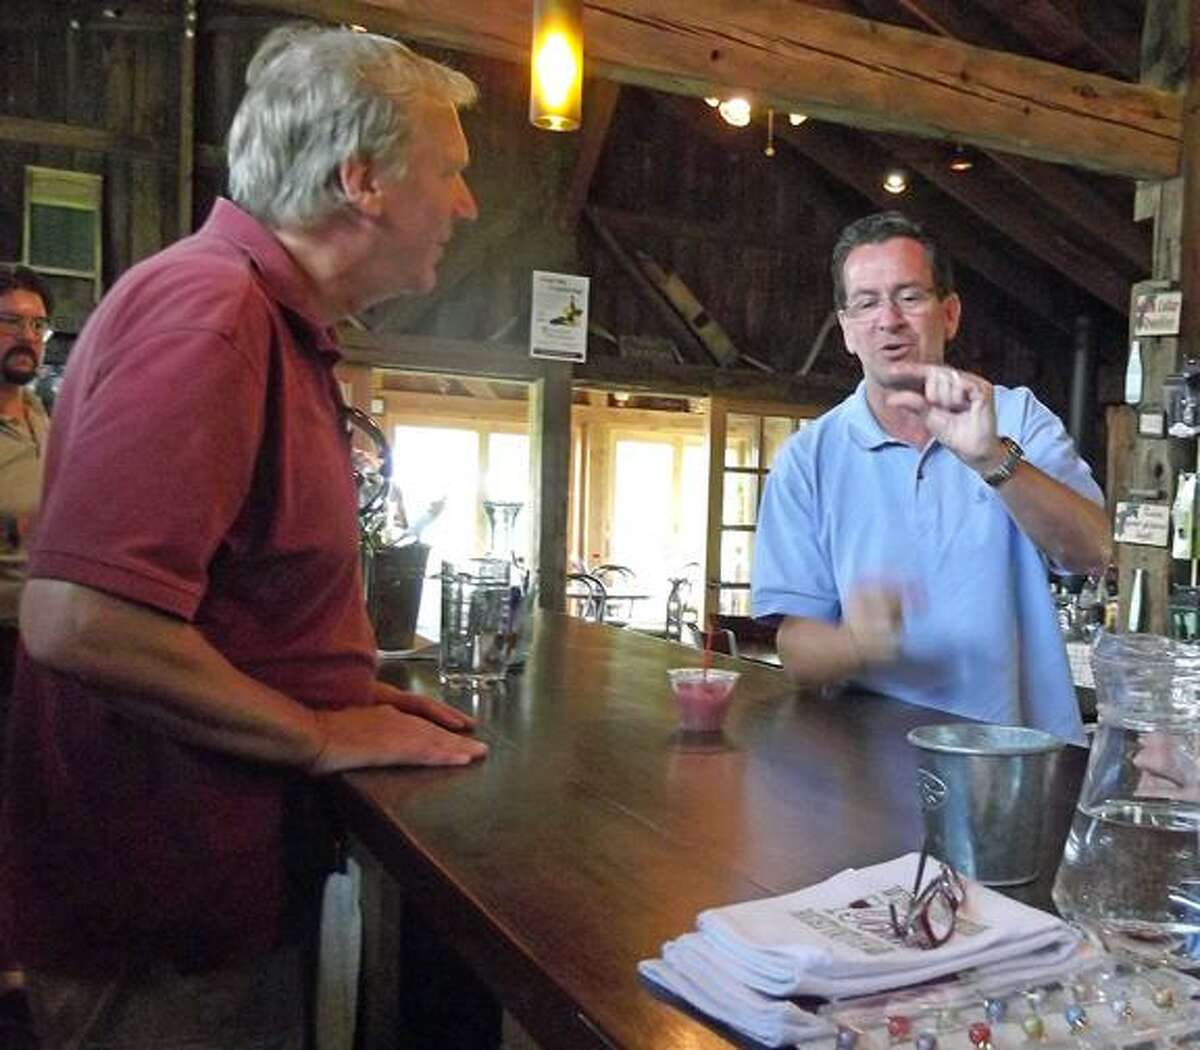 Governor Dannel P. Malloy, in Goshen Monday as part of his promote tourism tour, tells George Motel how much of a taste of wine he wants. Motel is the founder and wine maker at Sunset Meadow Vineyards, the last stop on the governor's five-stop tour. (MICHELLE MERLIN / Register Citizen)